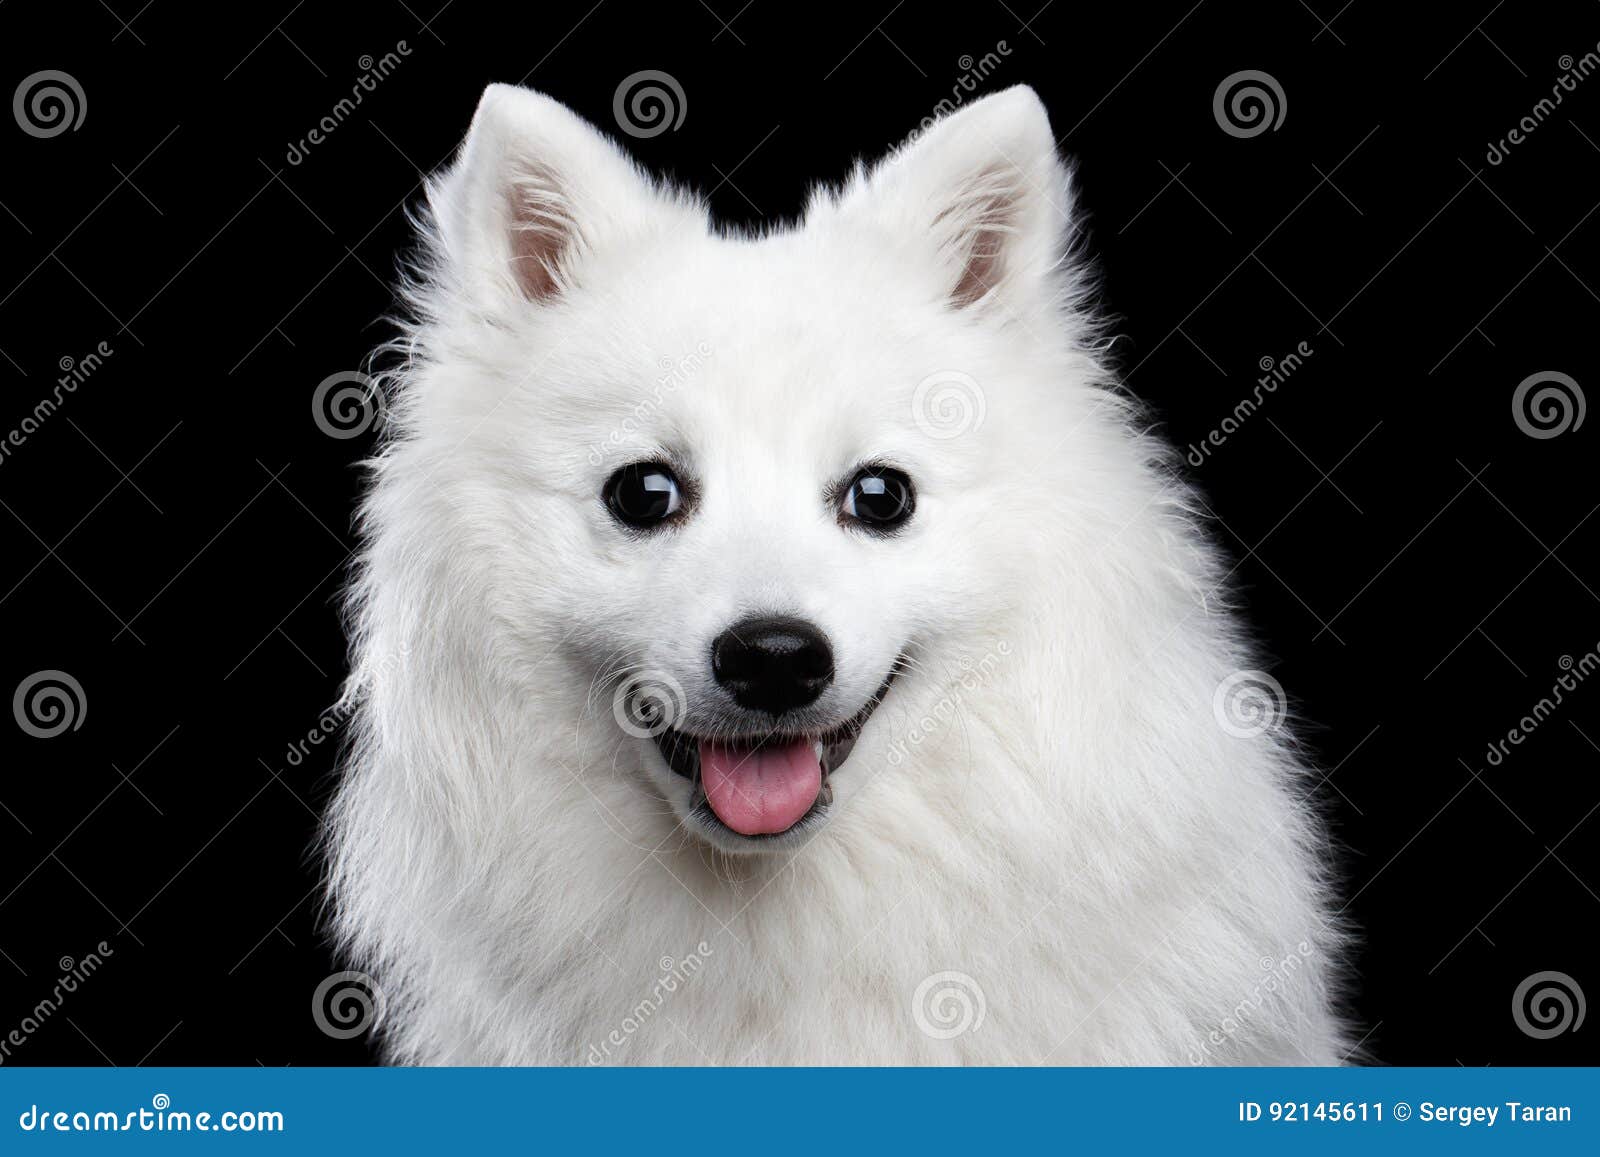 106 Black Japanese Spitz Photos Free Royalty Free Stock Photos From Dreamstime